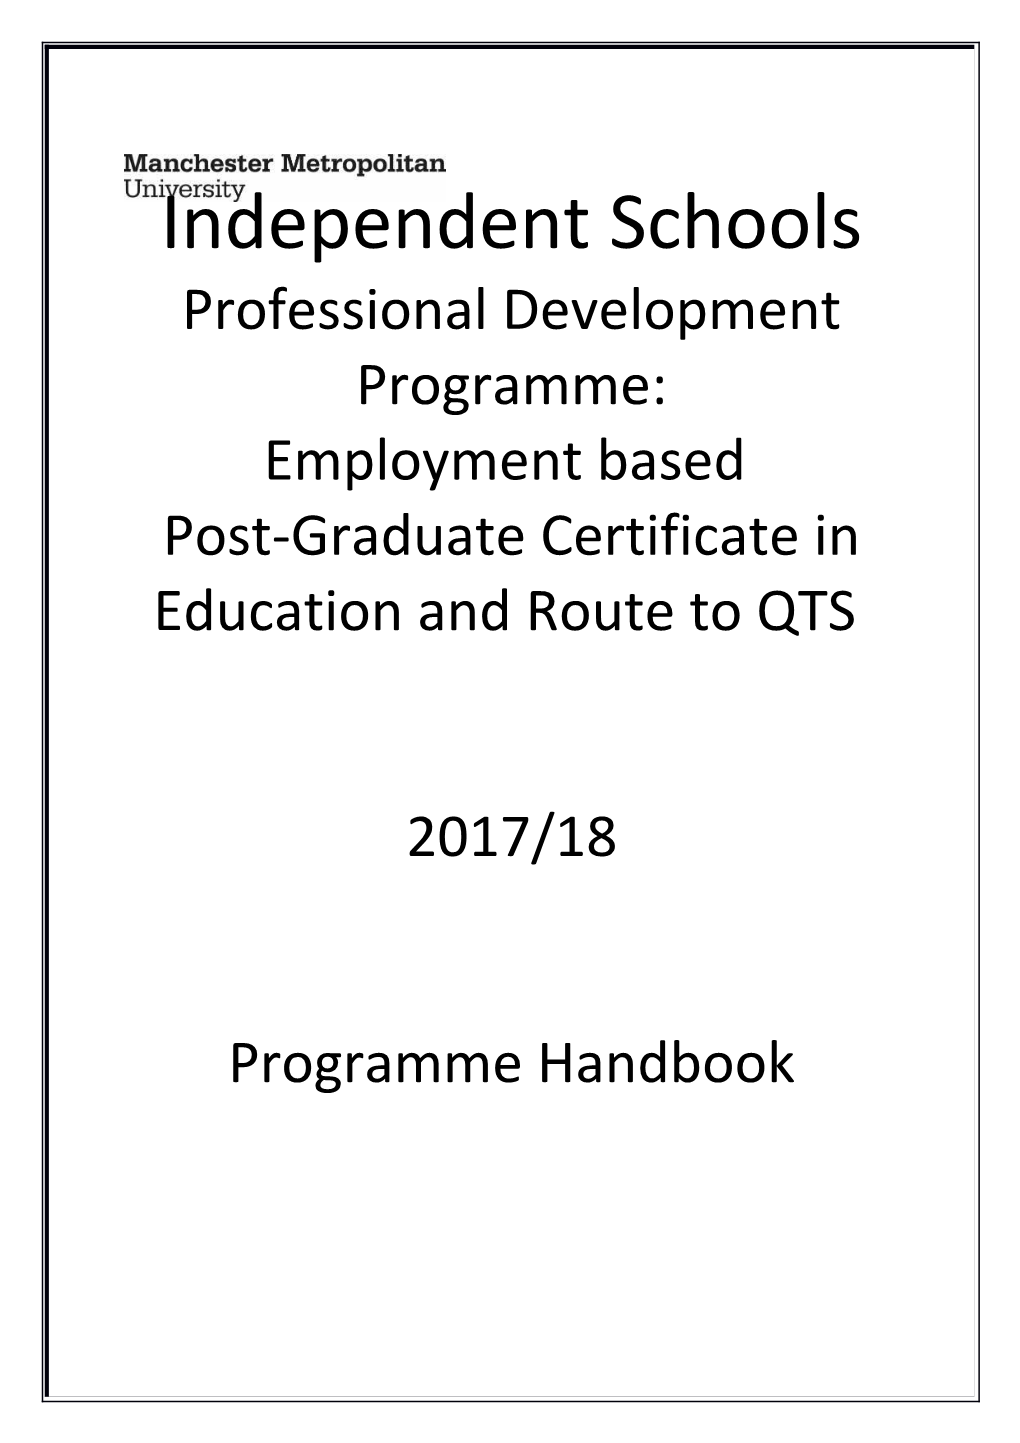 Post-Graduate Certificate in Education and Route to QTS